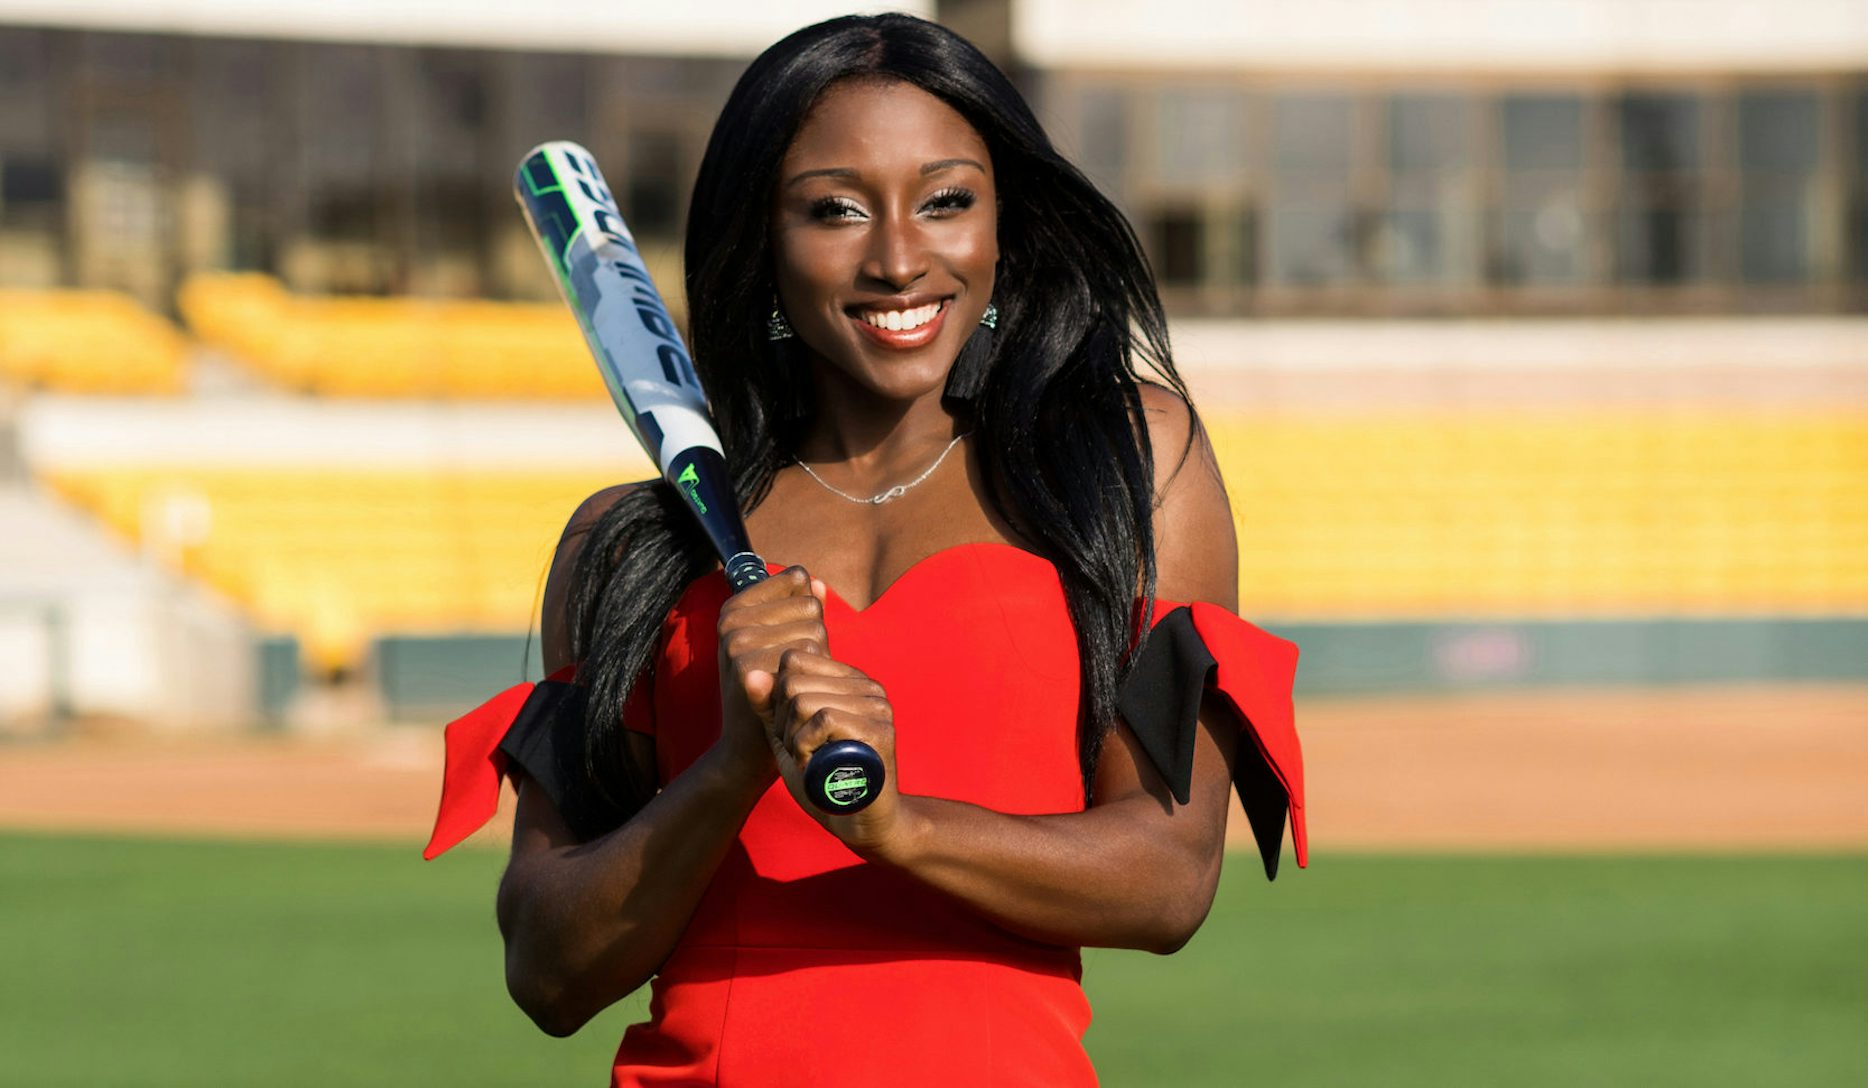 From The April Issue Softball Star A J Andrews Gives New Meaning To ‘girl Power’